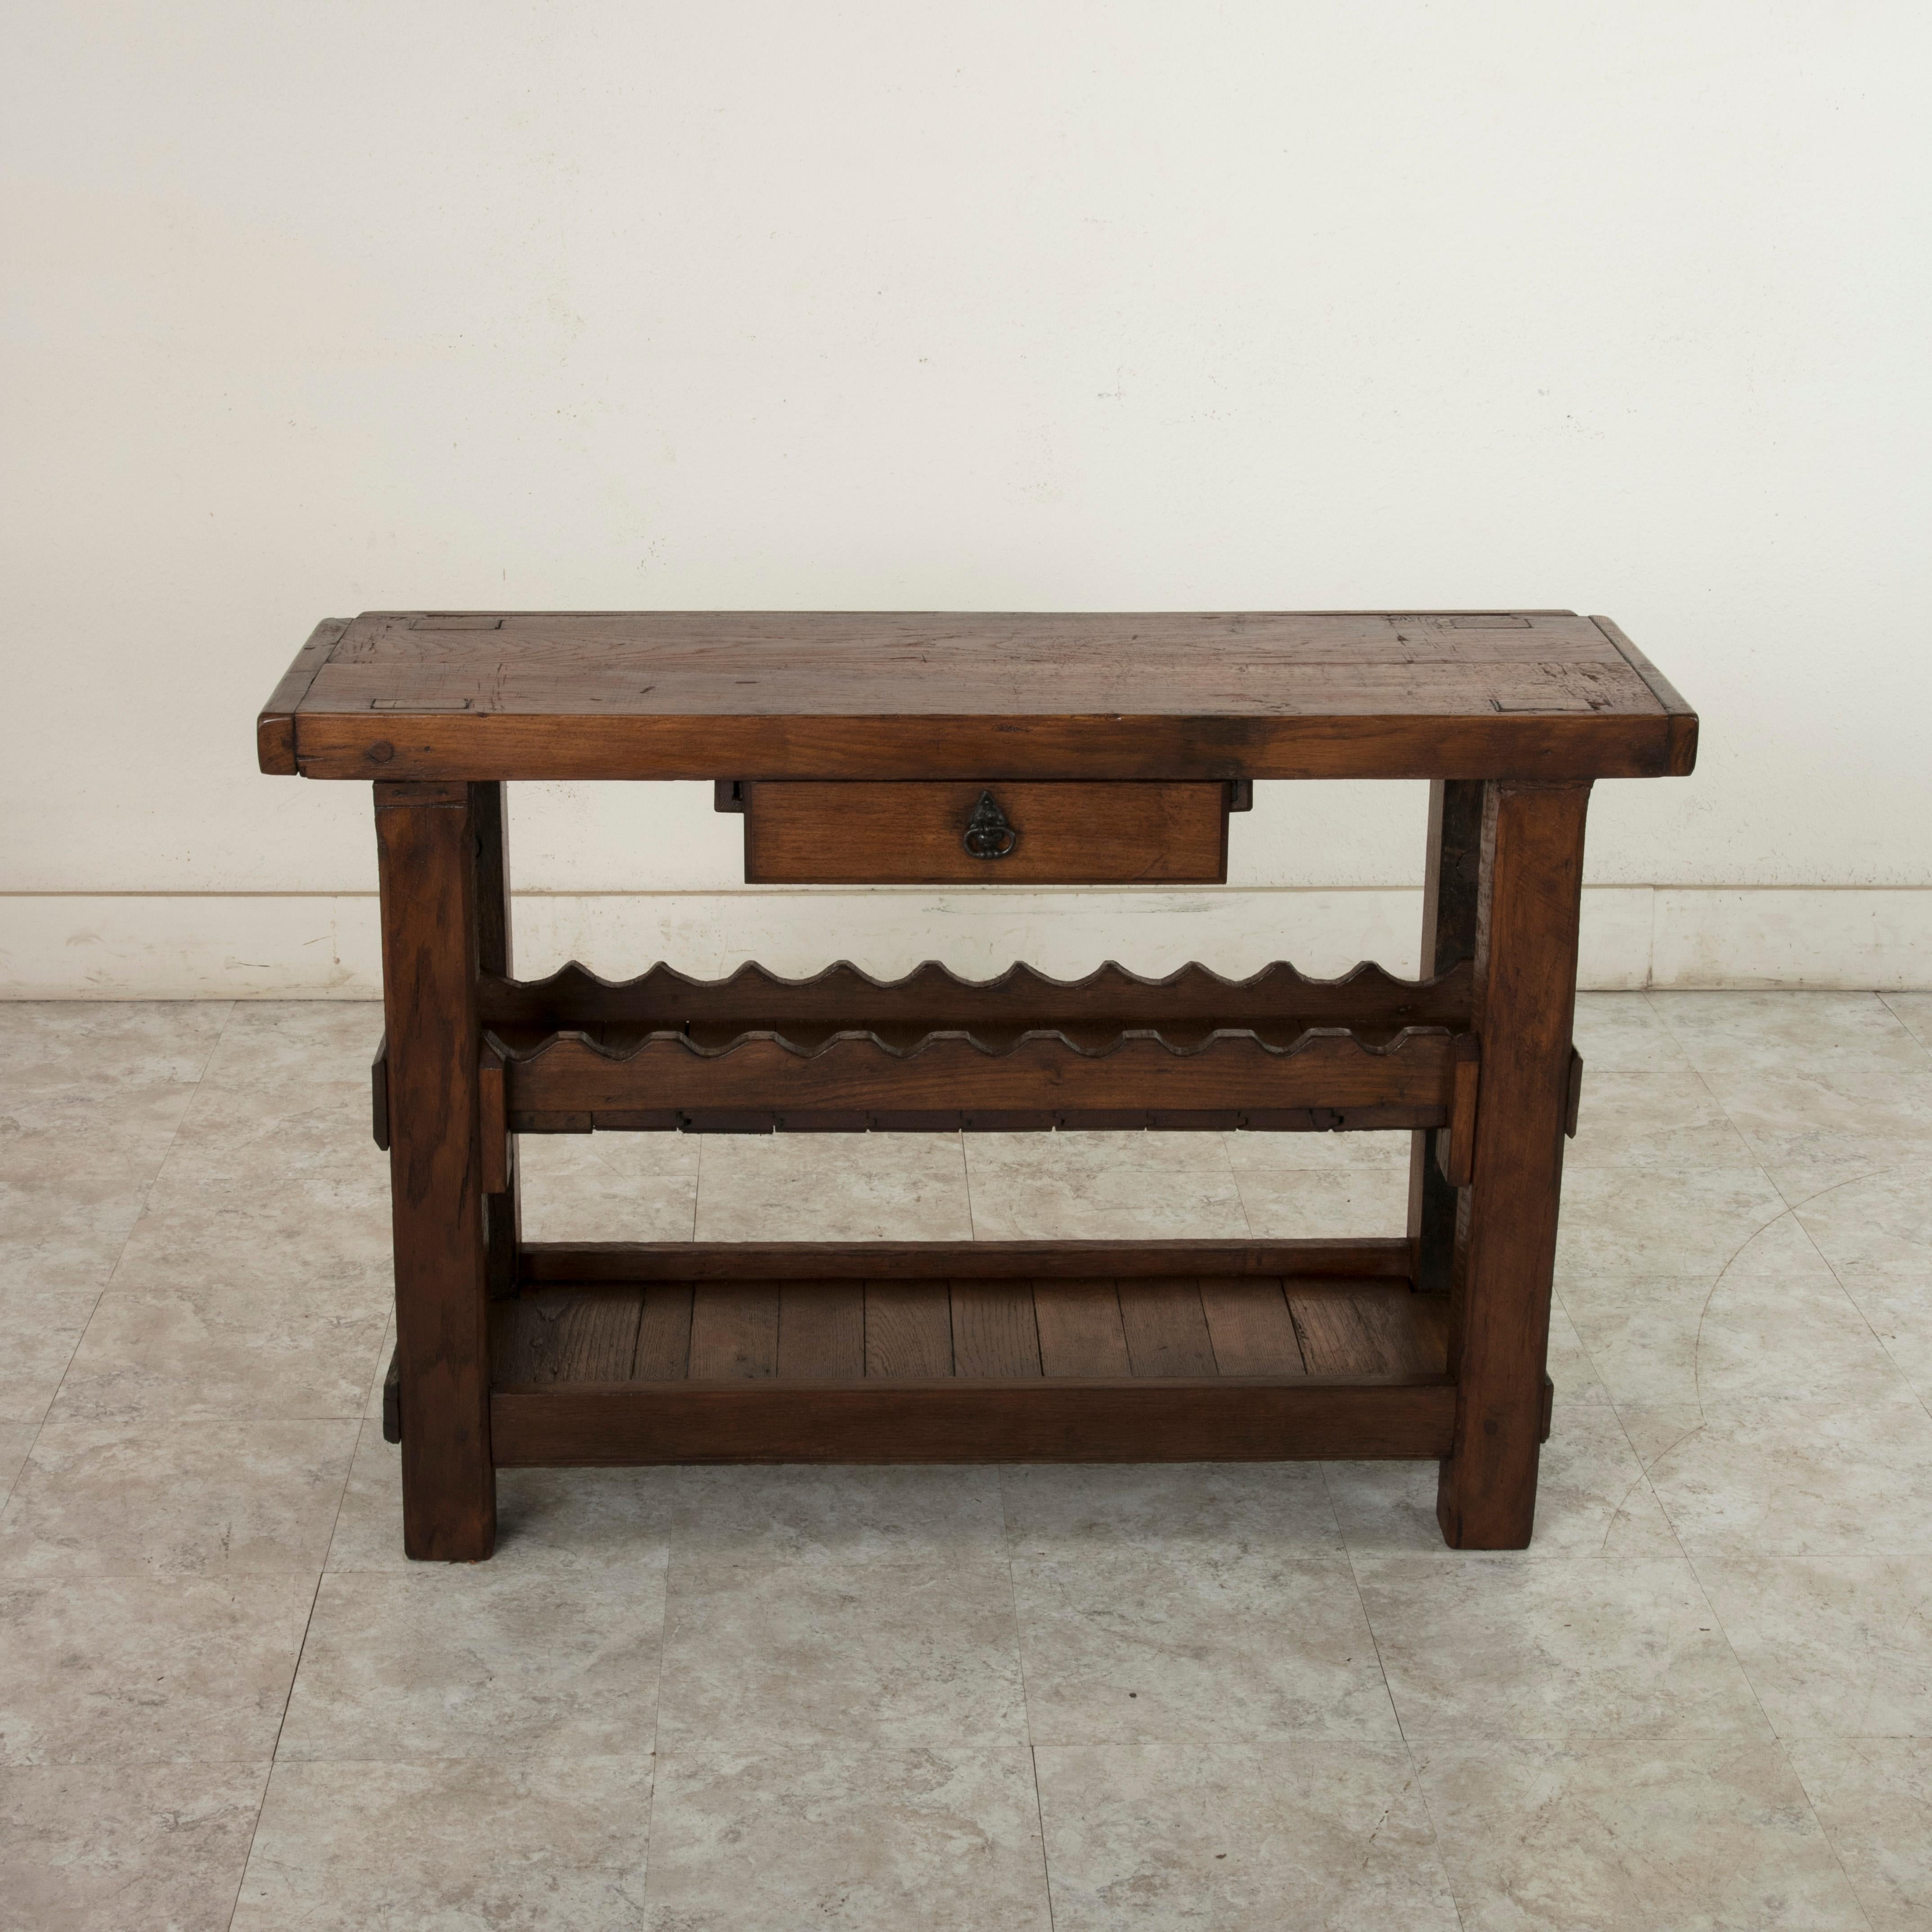 This early 20th century French oak workbench from Normandy, France features a 2.25 inch thick top with a single drawer. Two slots at the back of the top once kept the artisan's tools close at hand. This workbench is constructed using mortise and